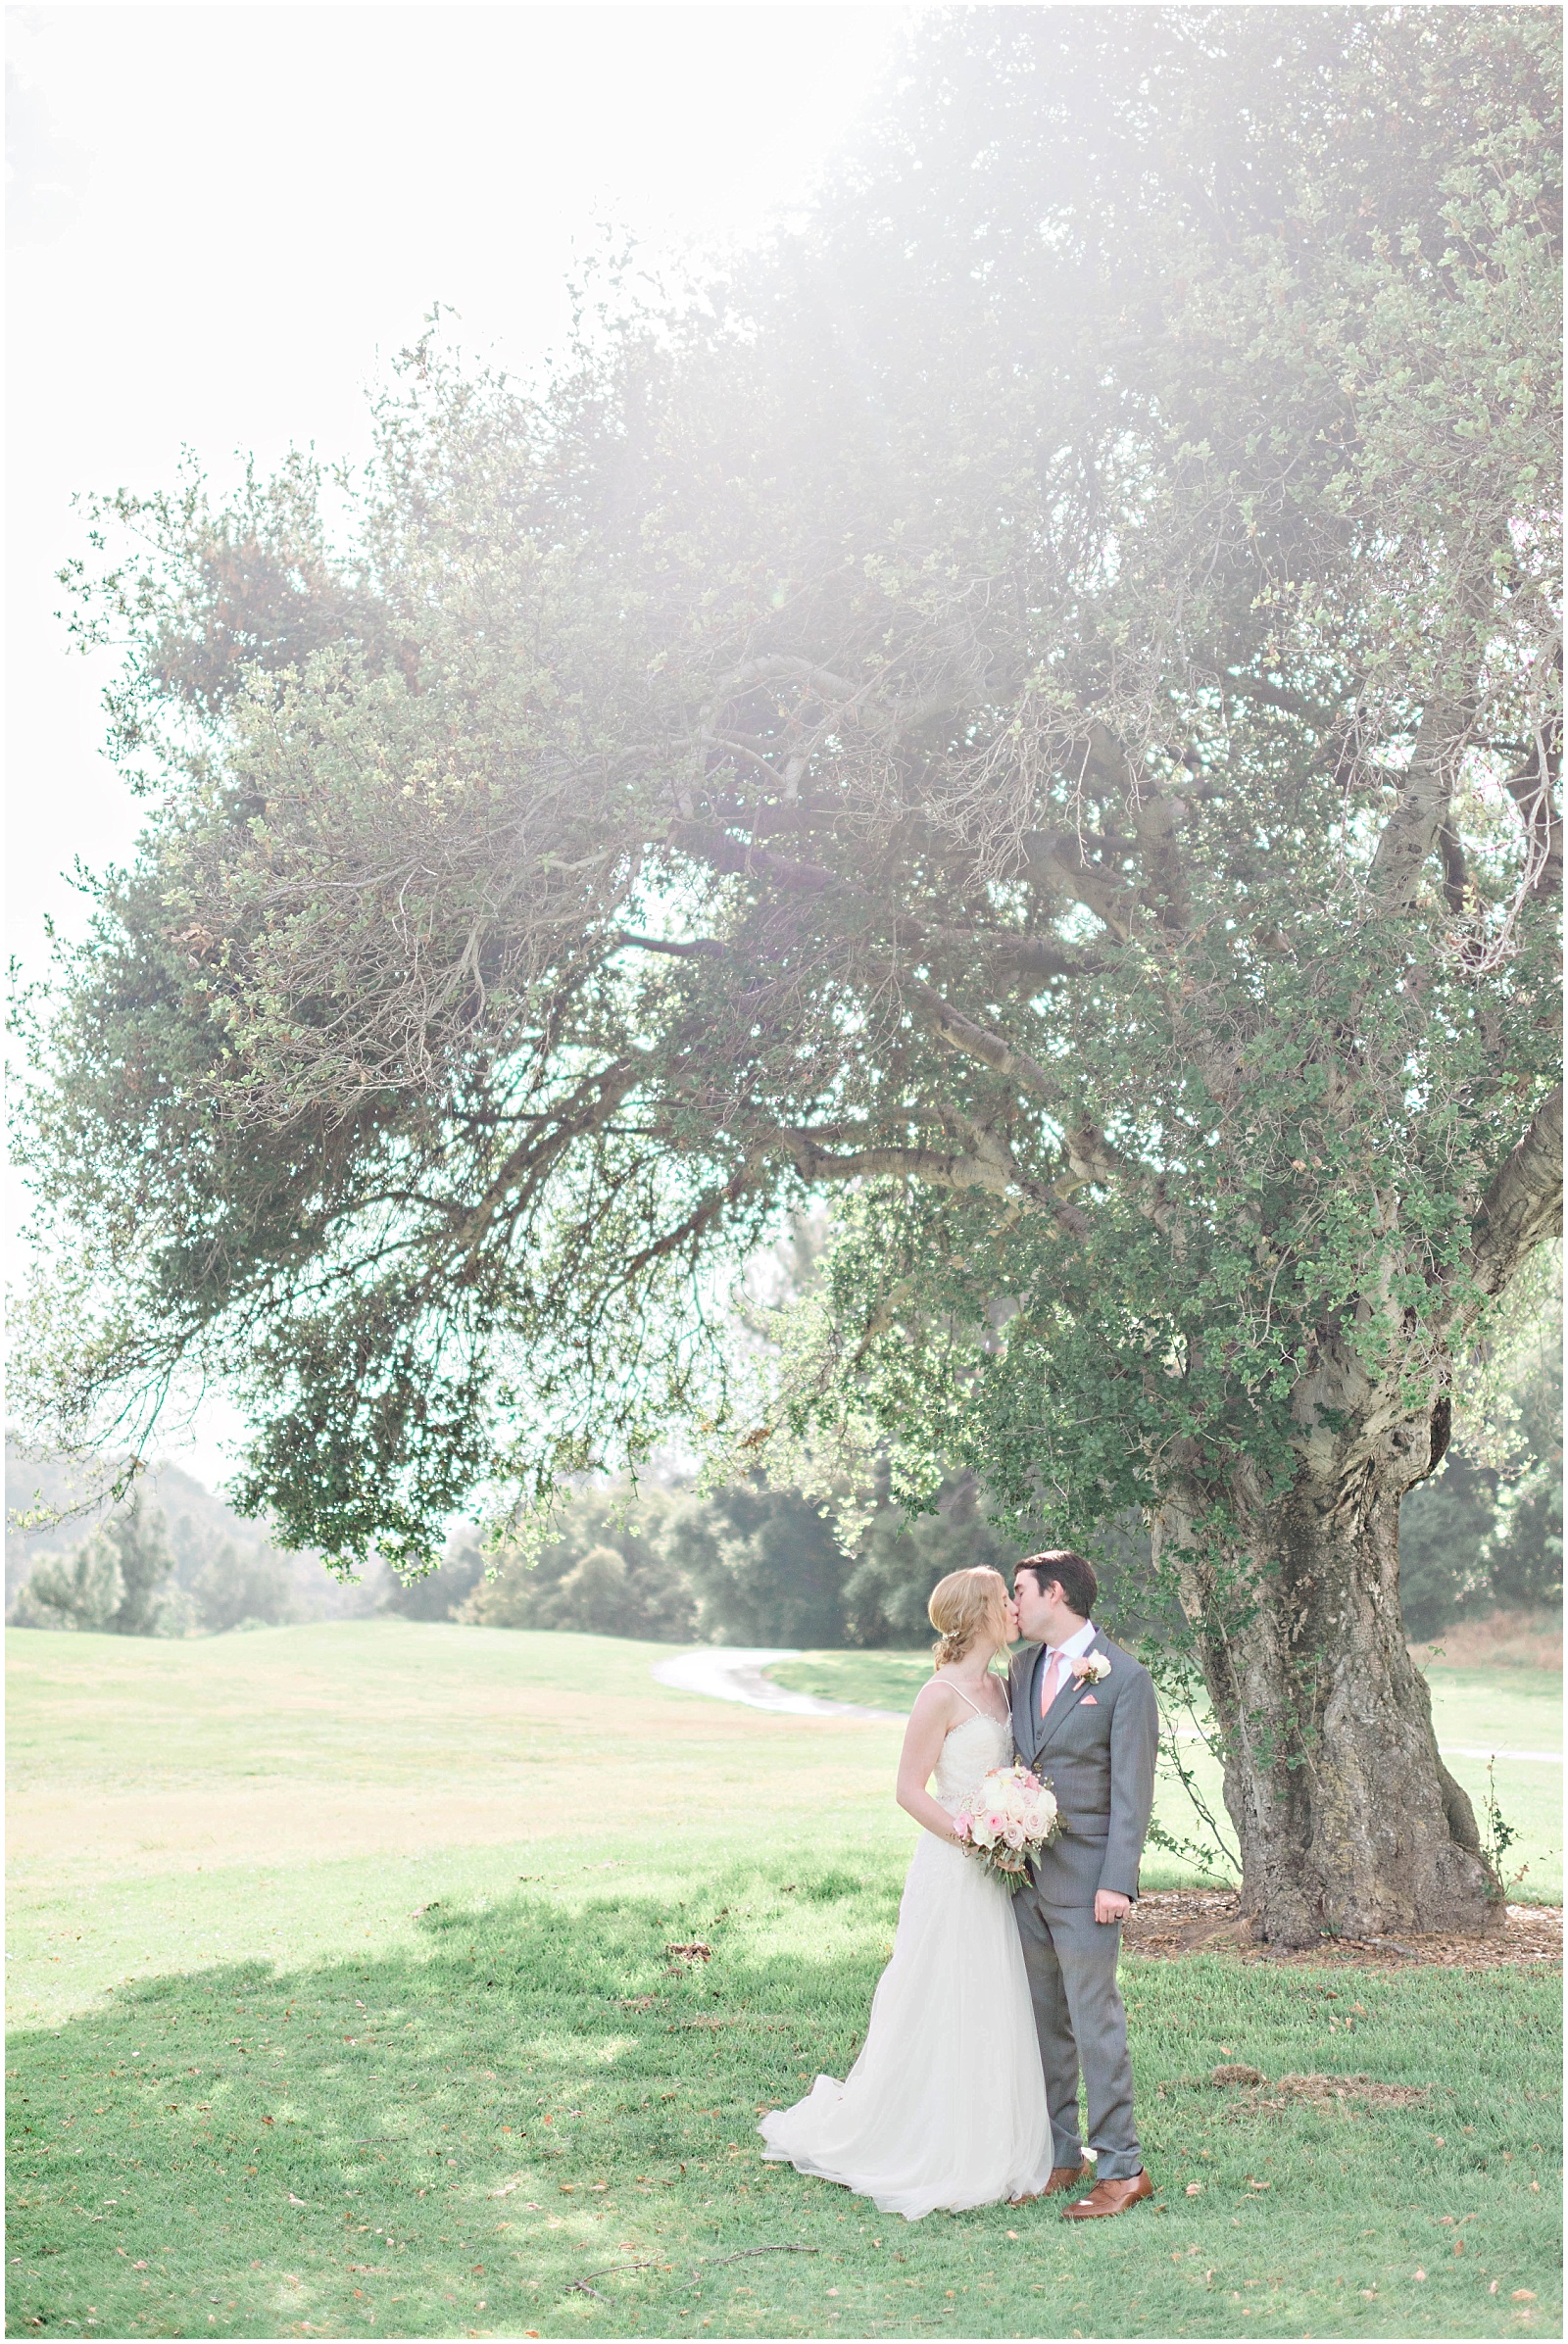 San Dimas Country Club Wedding. Photography by Mollie Jane Photography. To see more go to www.molliejanephotography.com